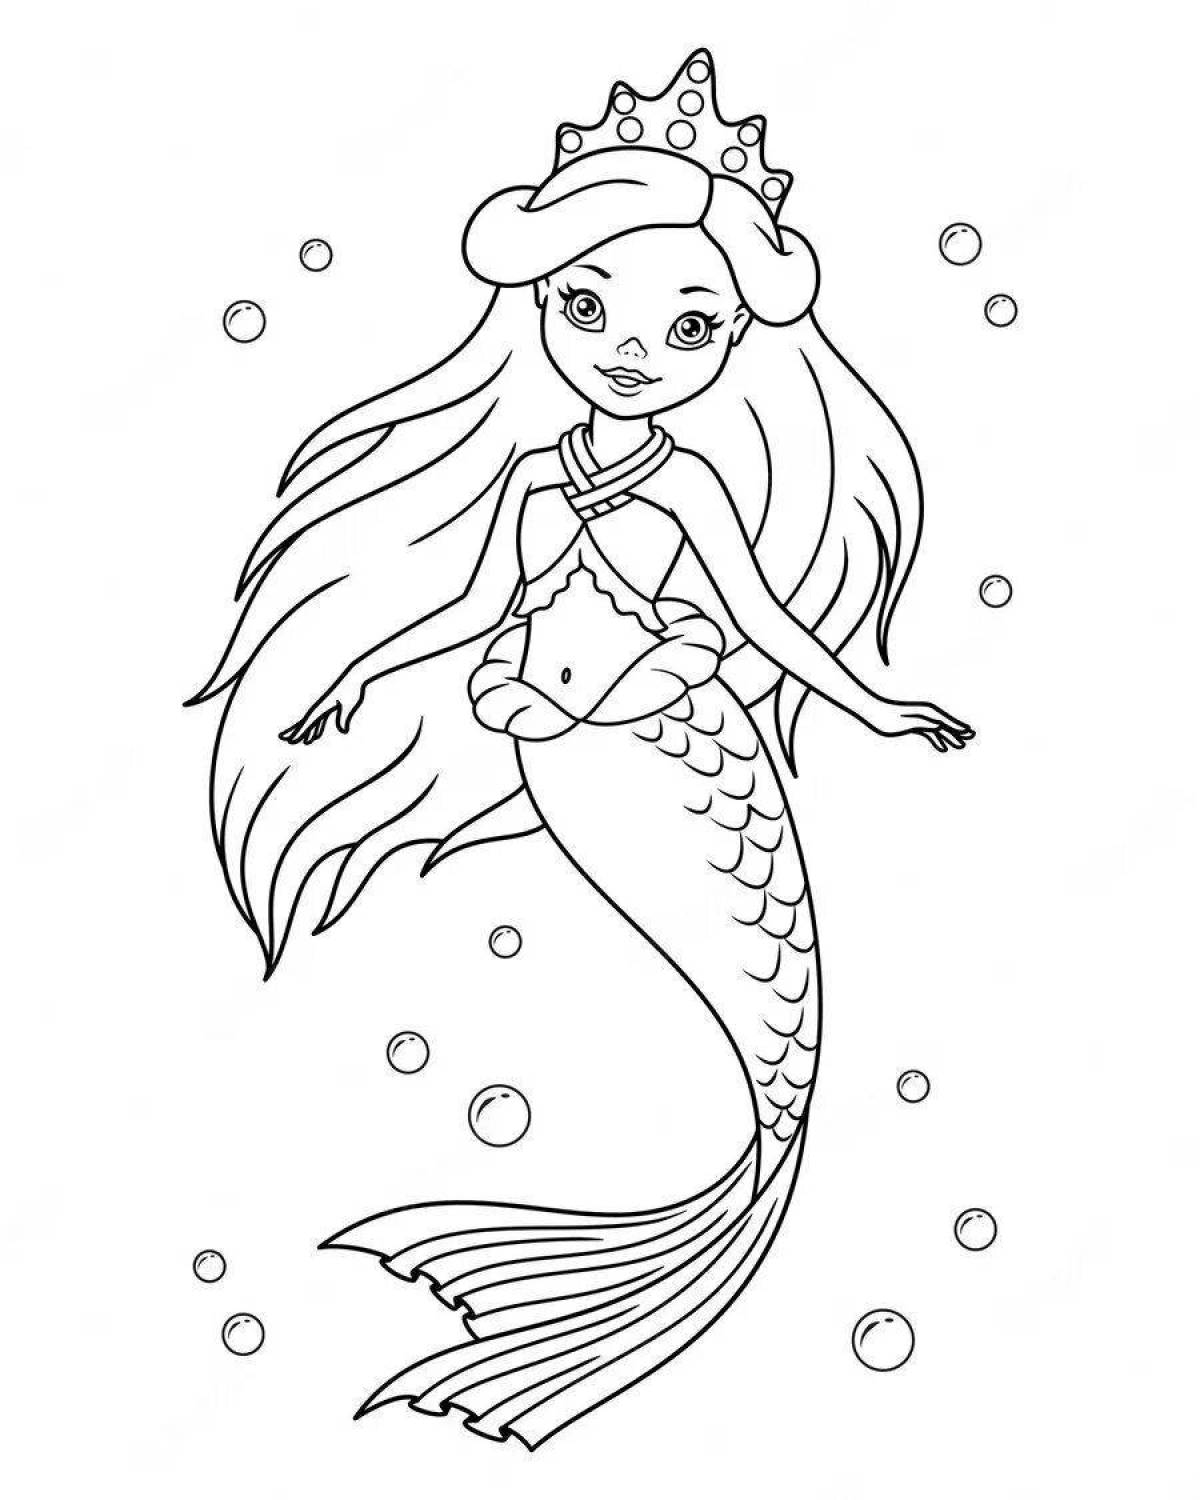 Awesome mermaid queen coloring page